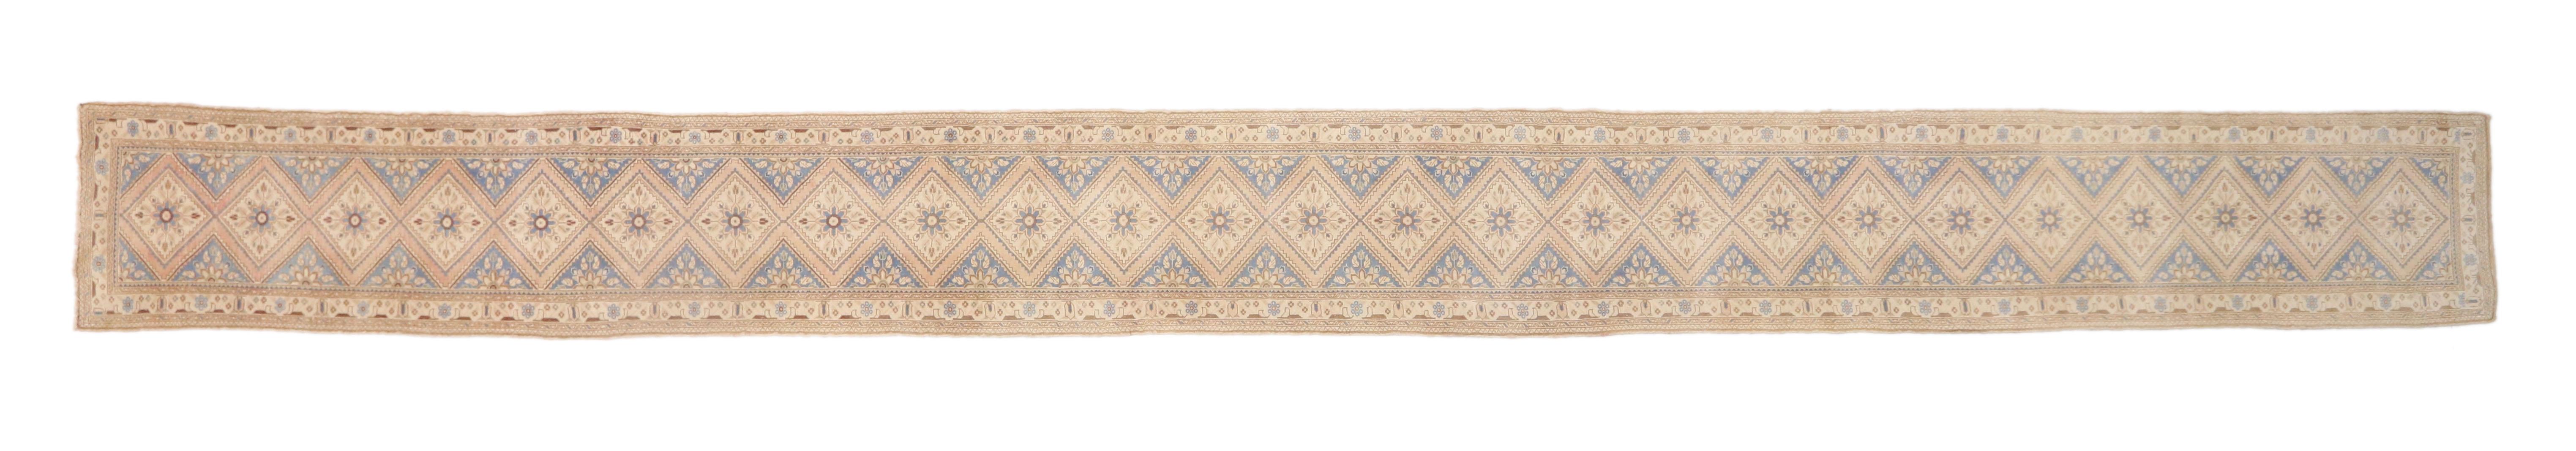 Antique Persian Malayer Runner with French Provincial Style, Long Hallway Runner 3